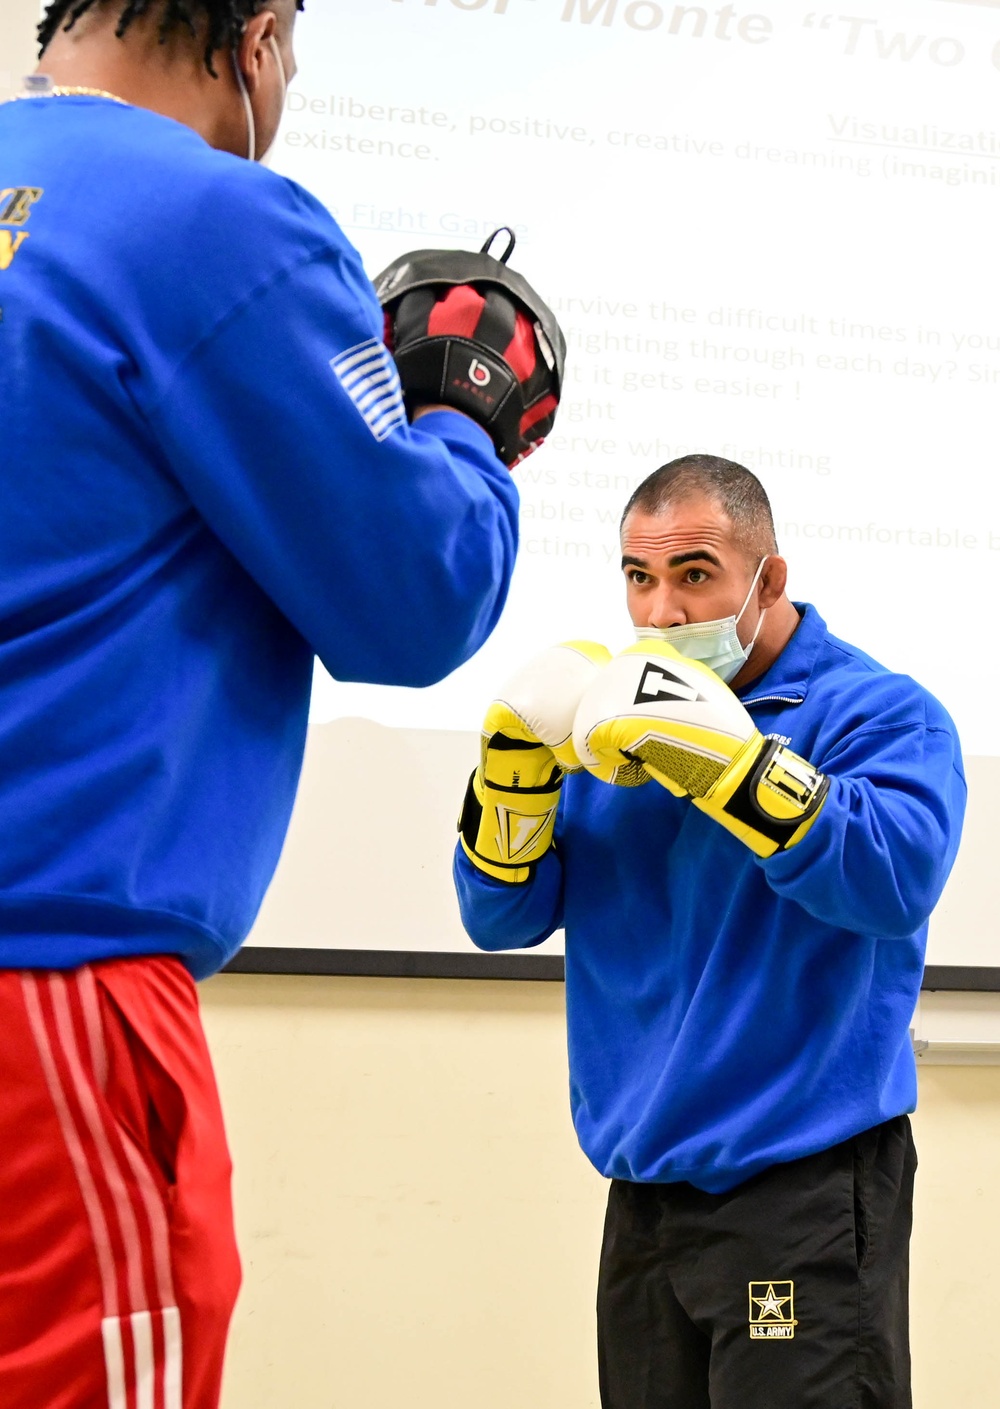 Human Performance Seminar features ‘Two Gunz’ Hall of Fame boxer